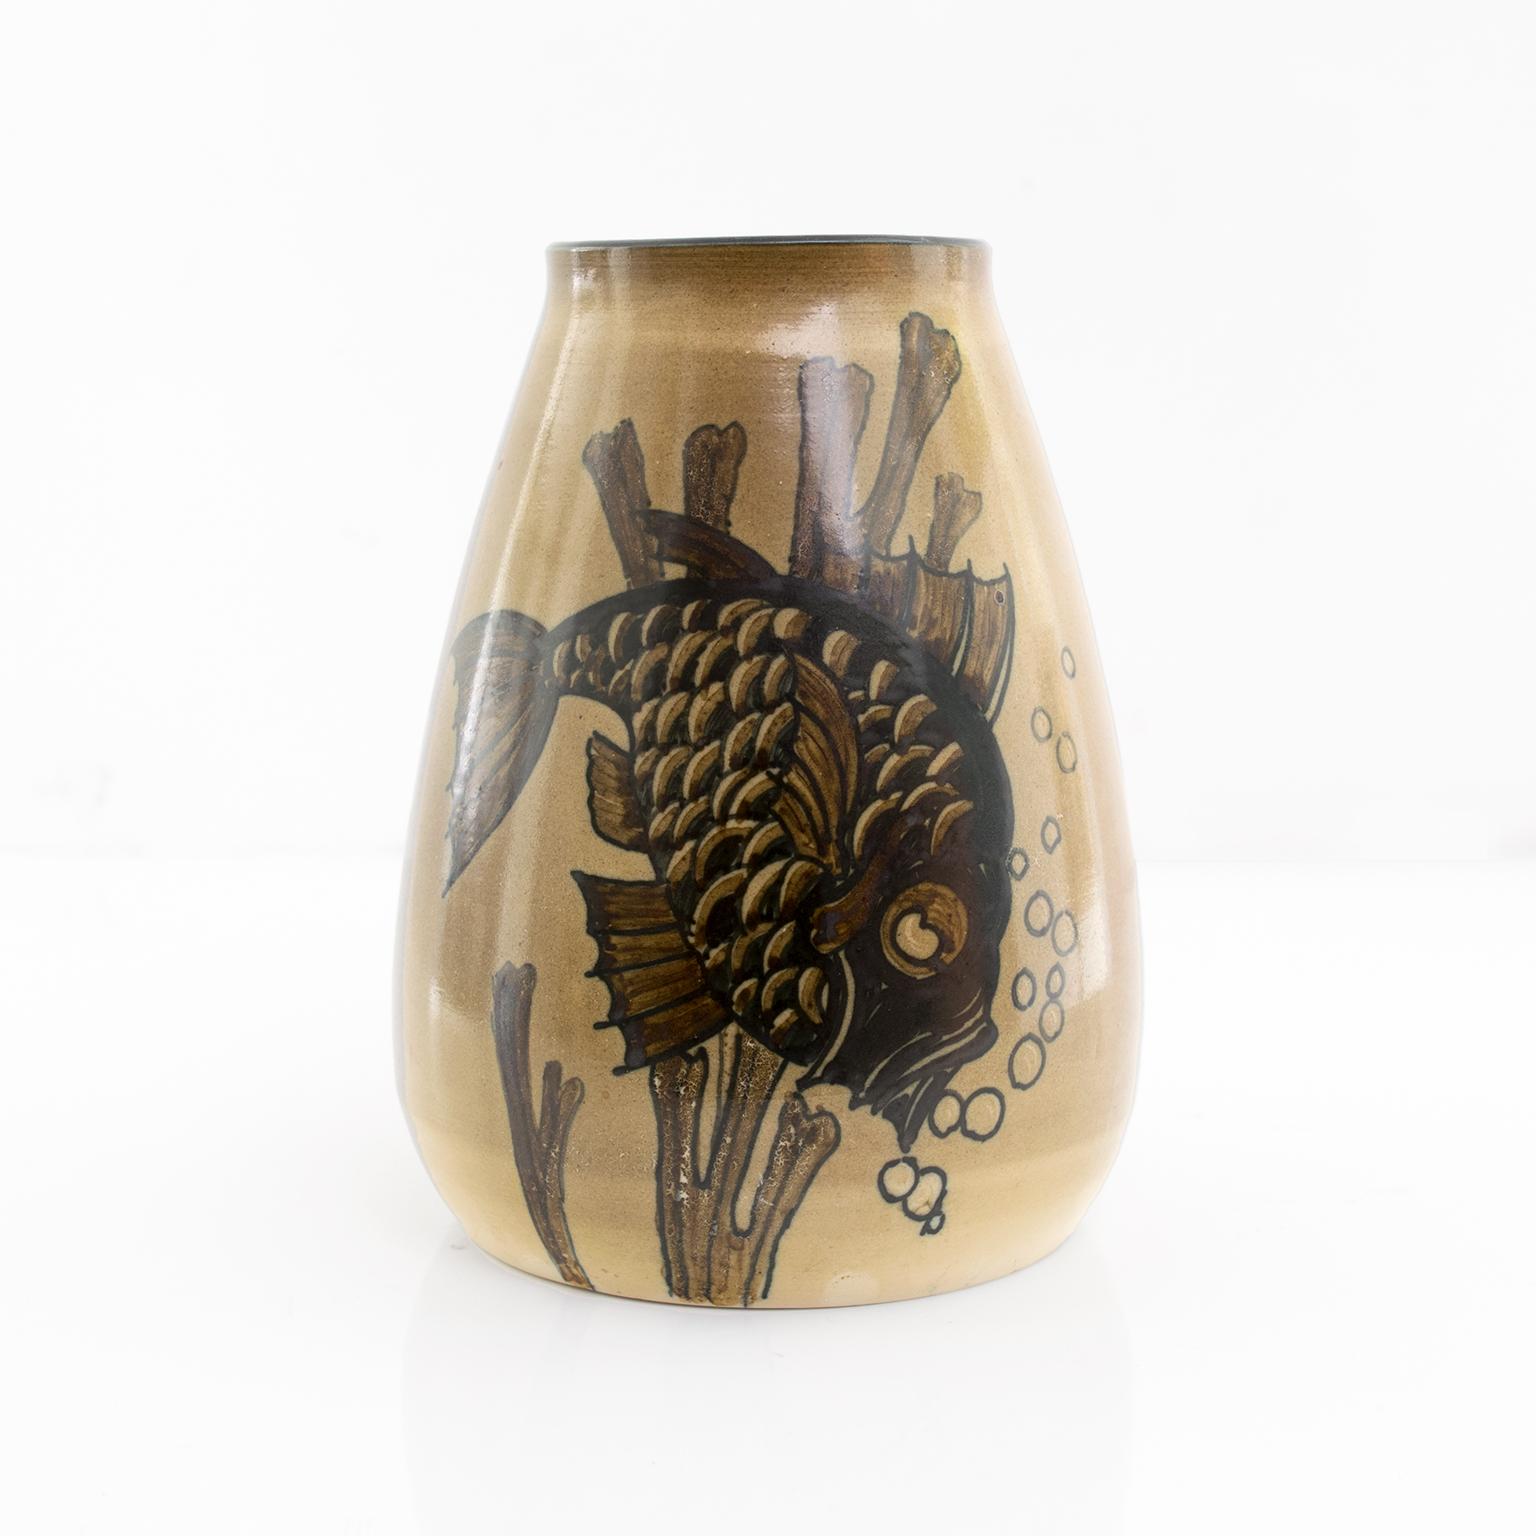 Unique Scandinavian Modern hand thrown and decorated Swedish Art Deco vase by Josef Ekberg depicting a fish underwater. Made at Gustavsberg, circa 1930.

Measures: Height: 7.75